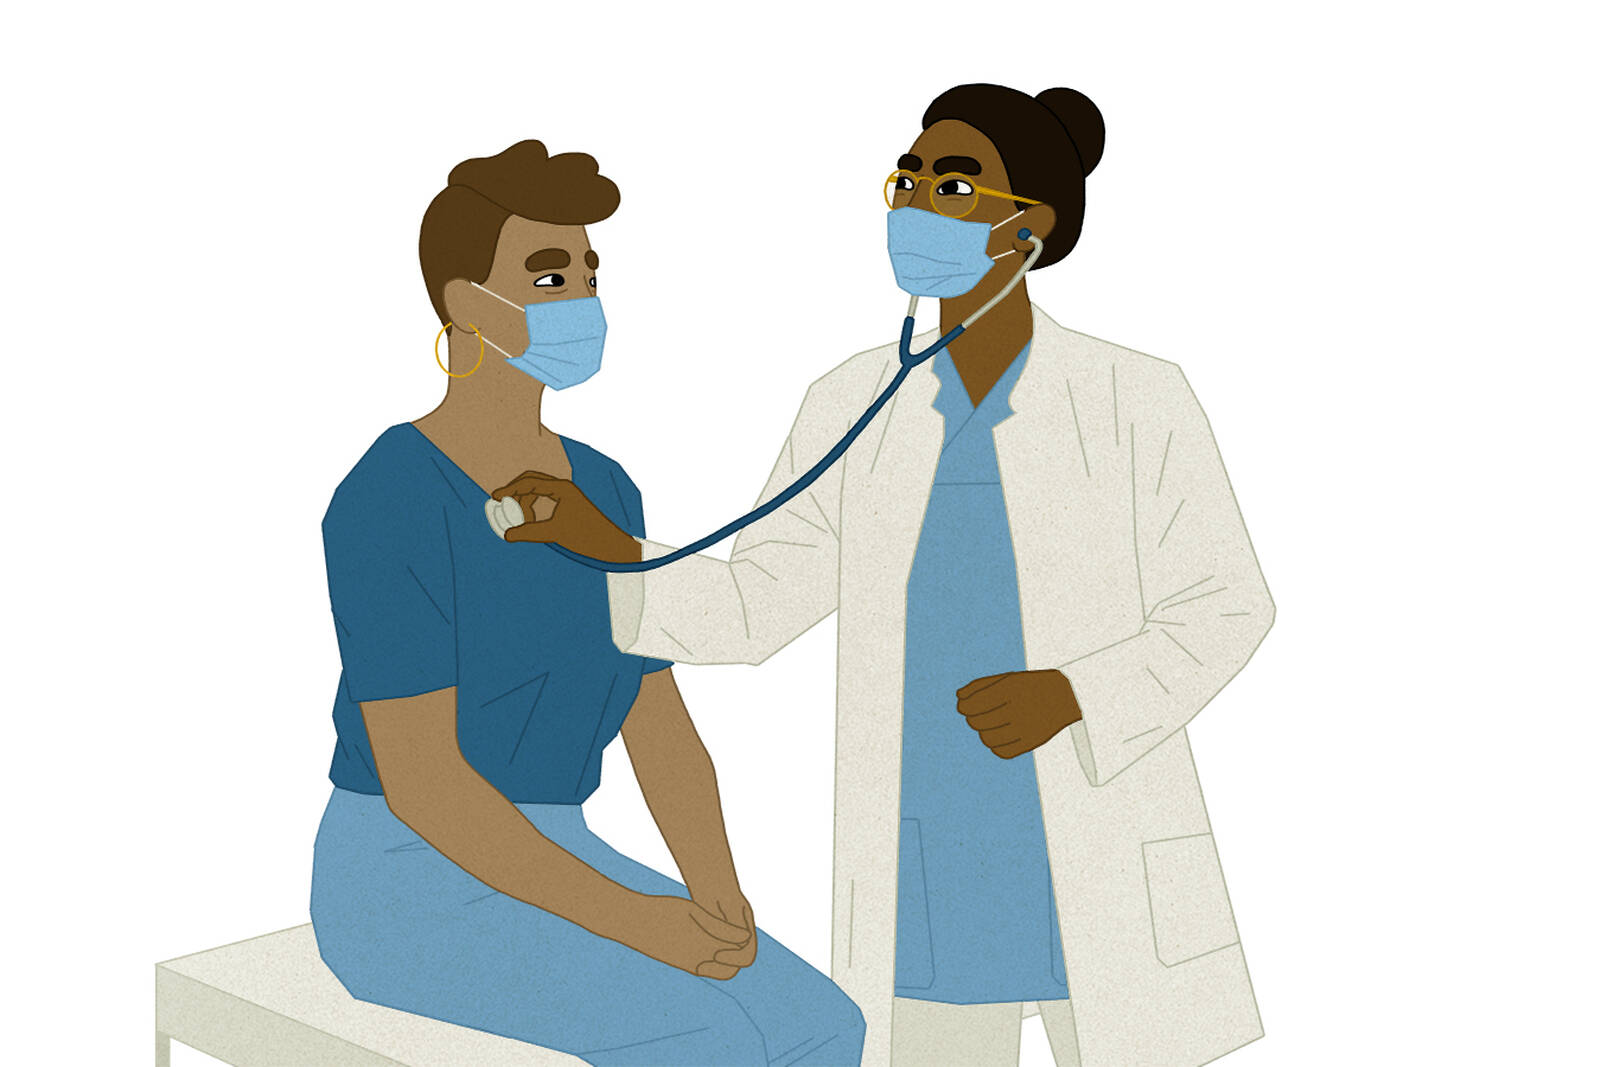 Doctor checks patient using stethoscope